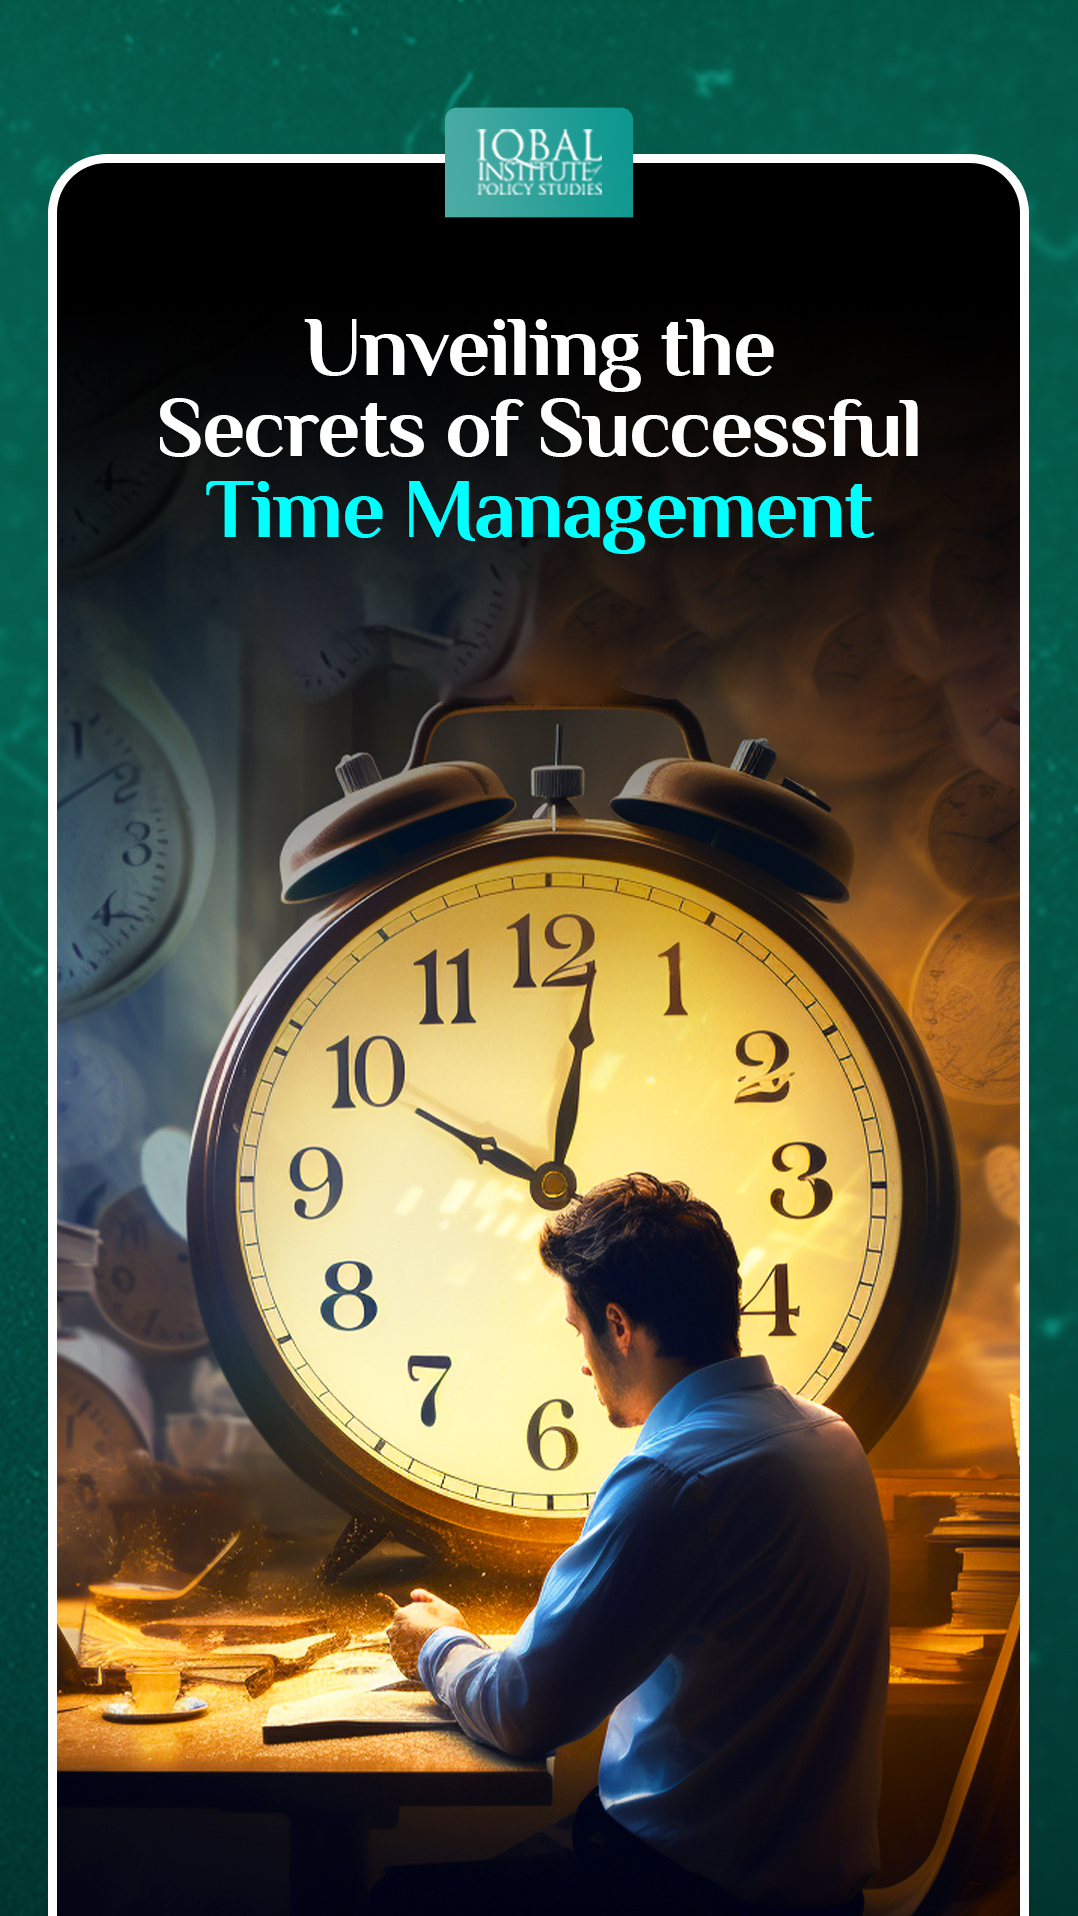 Benefits of Time Management